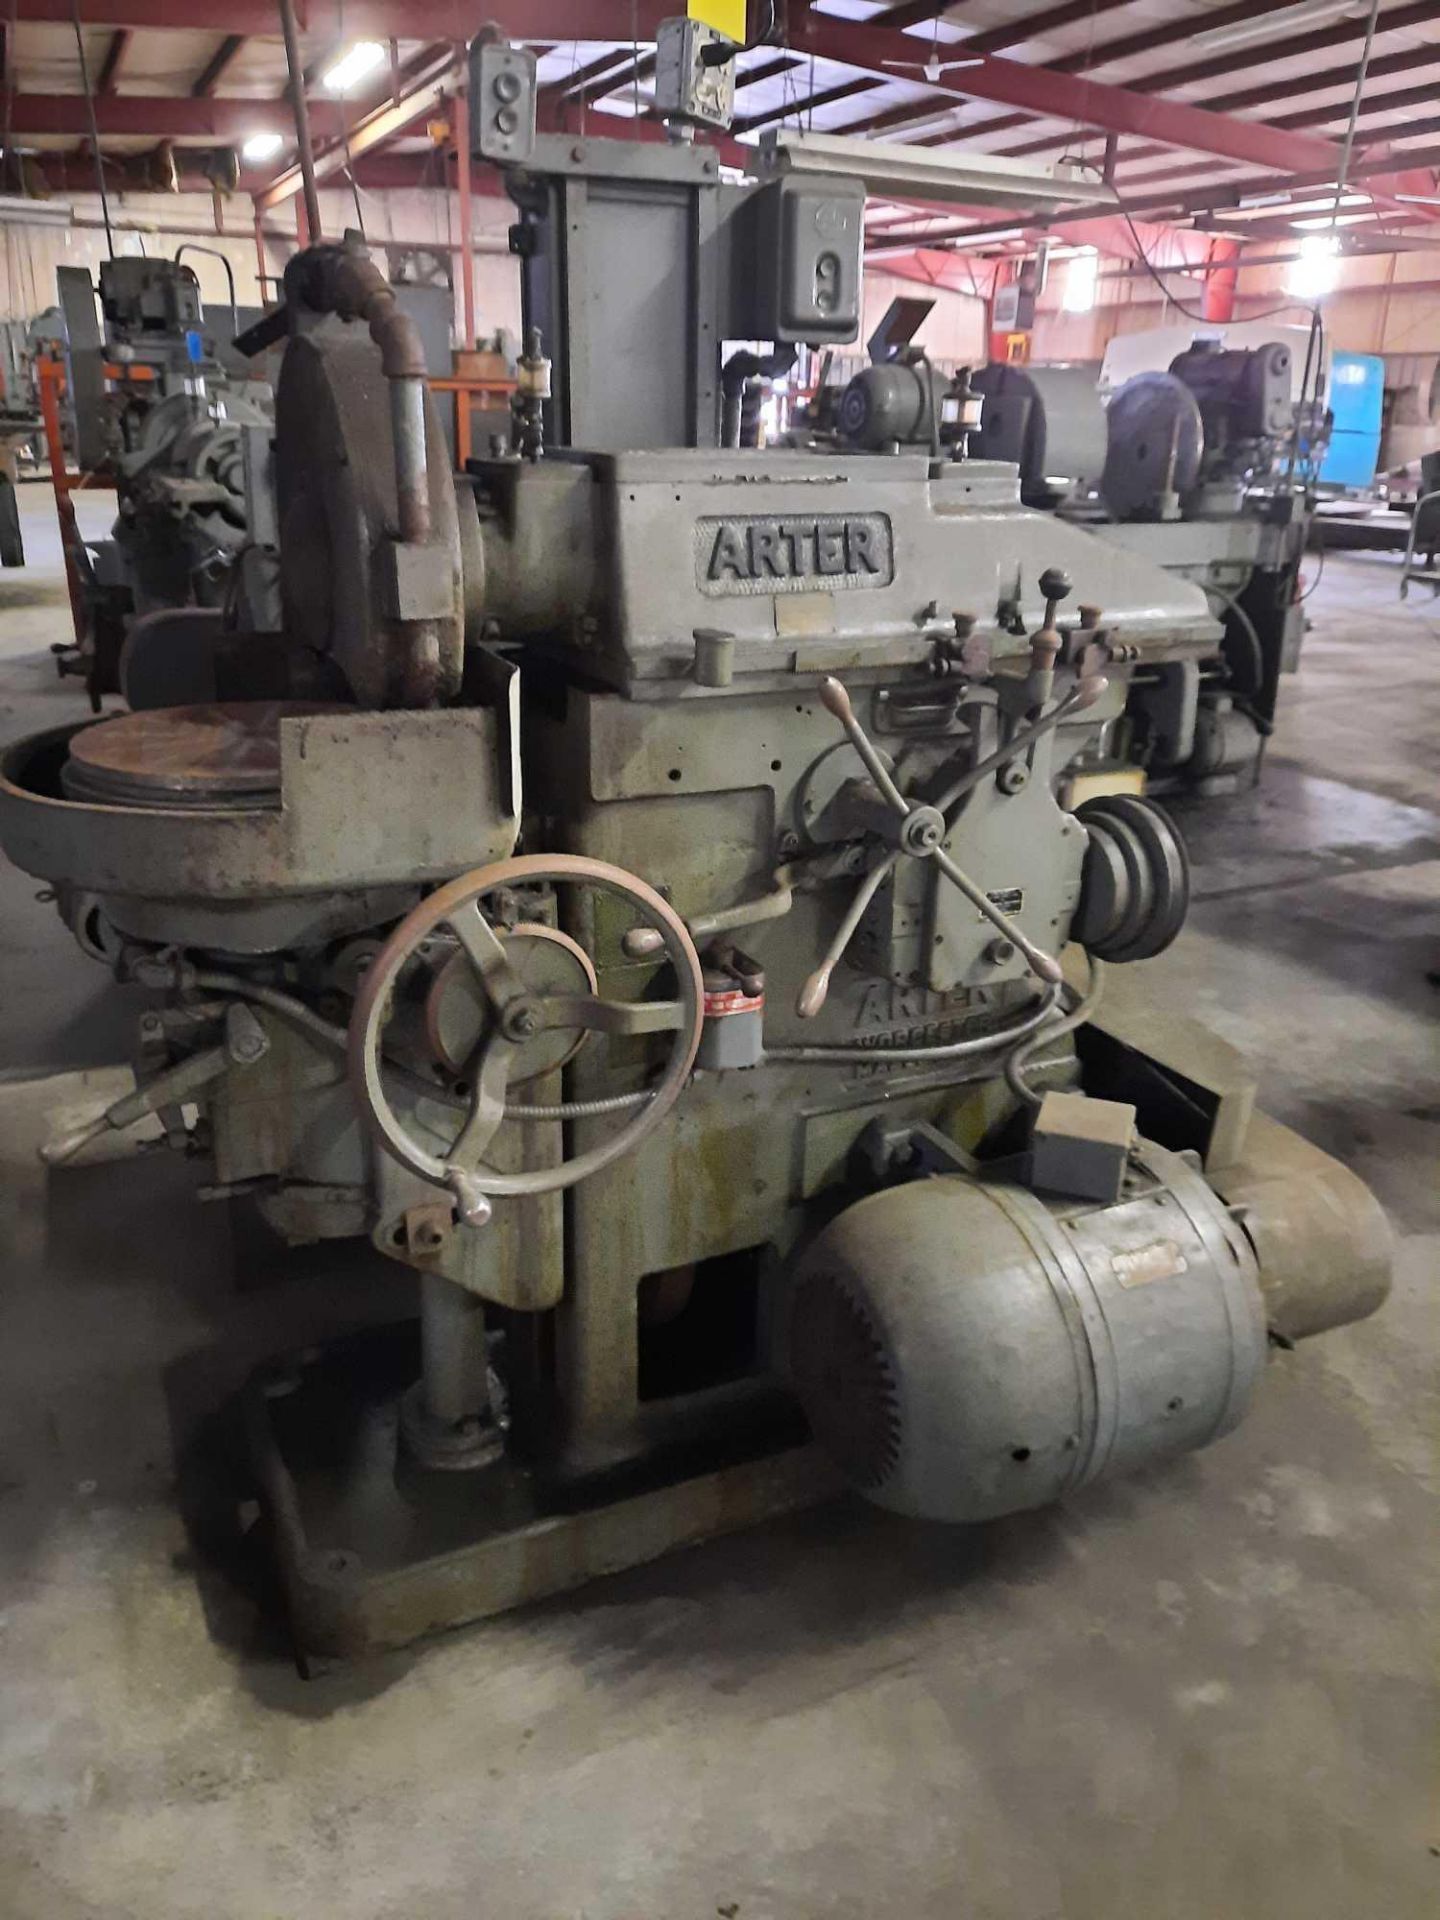 Arter rotary grinder, model A-1-12, serial 603, 14 inch chuck, overall dimensions 66 x 43 x 70 - Image 2 of 8